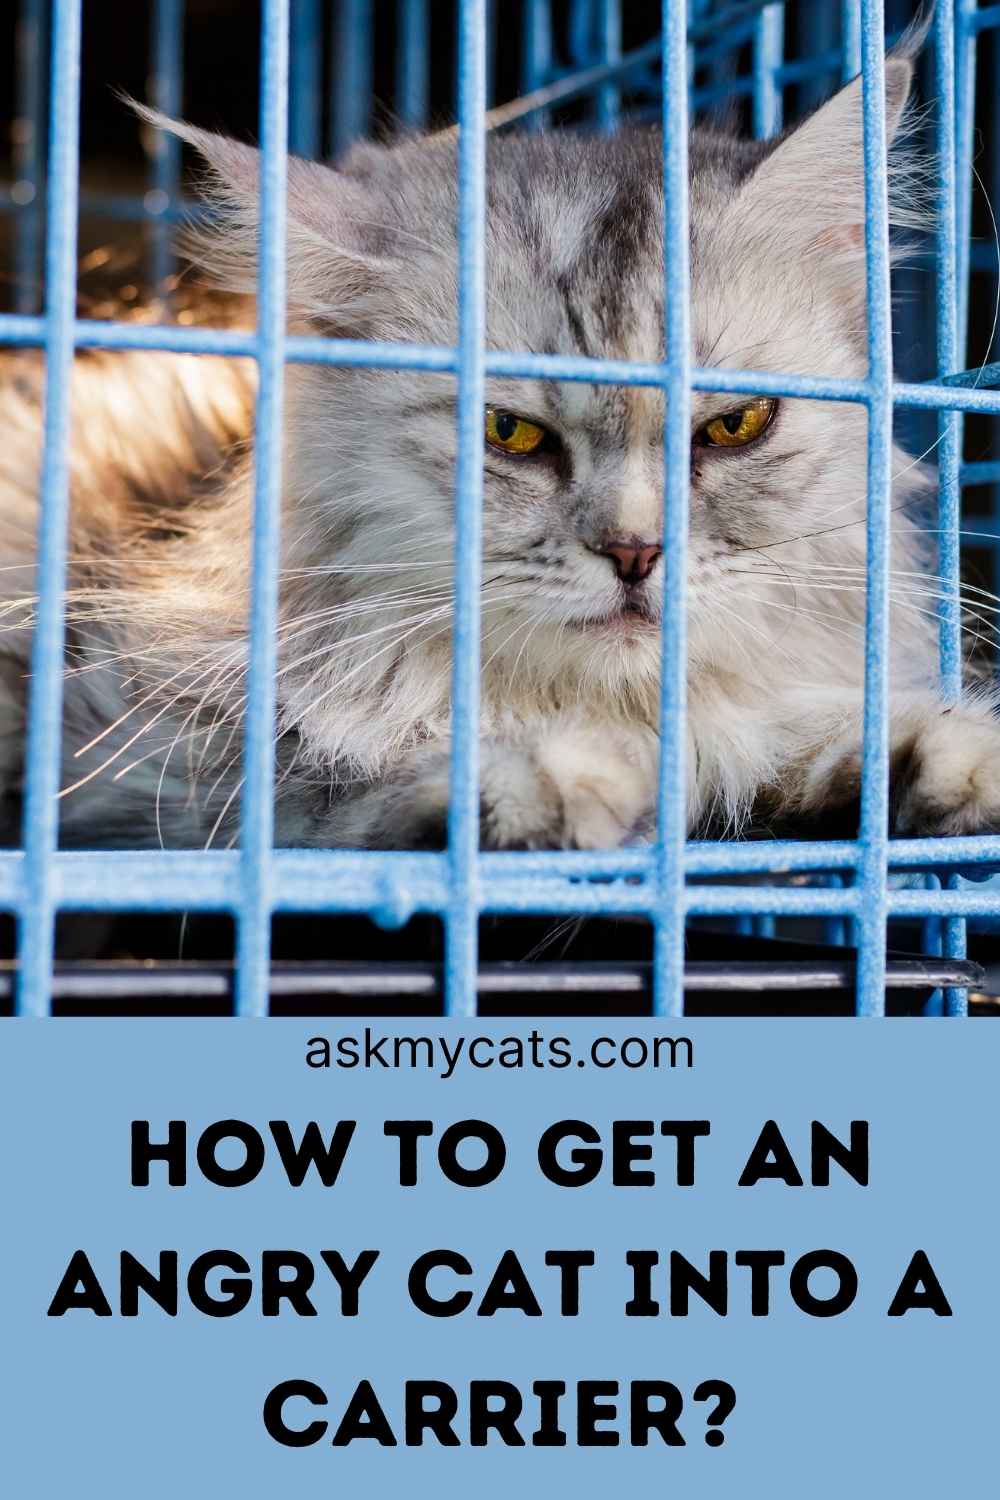 How To Get A Semi Feral Cat In A Carrier? Time To Trap Your Kitty!